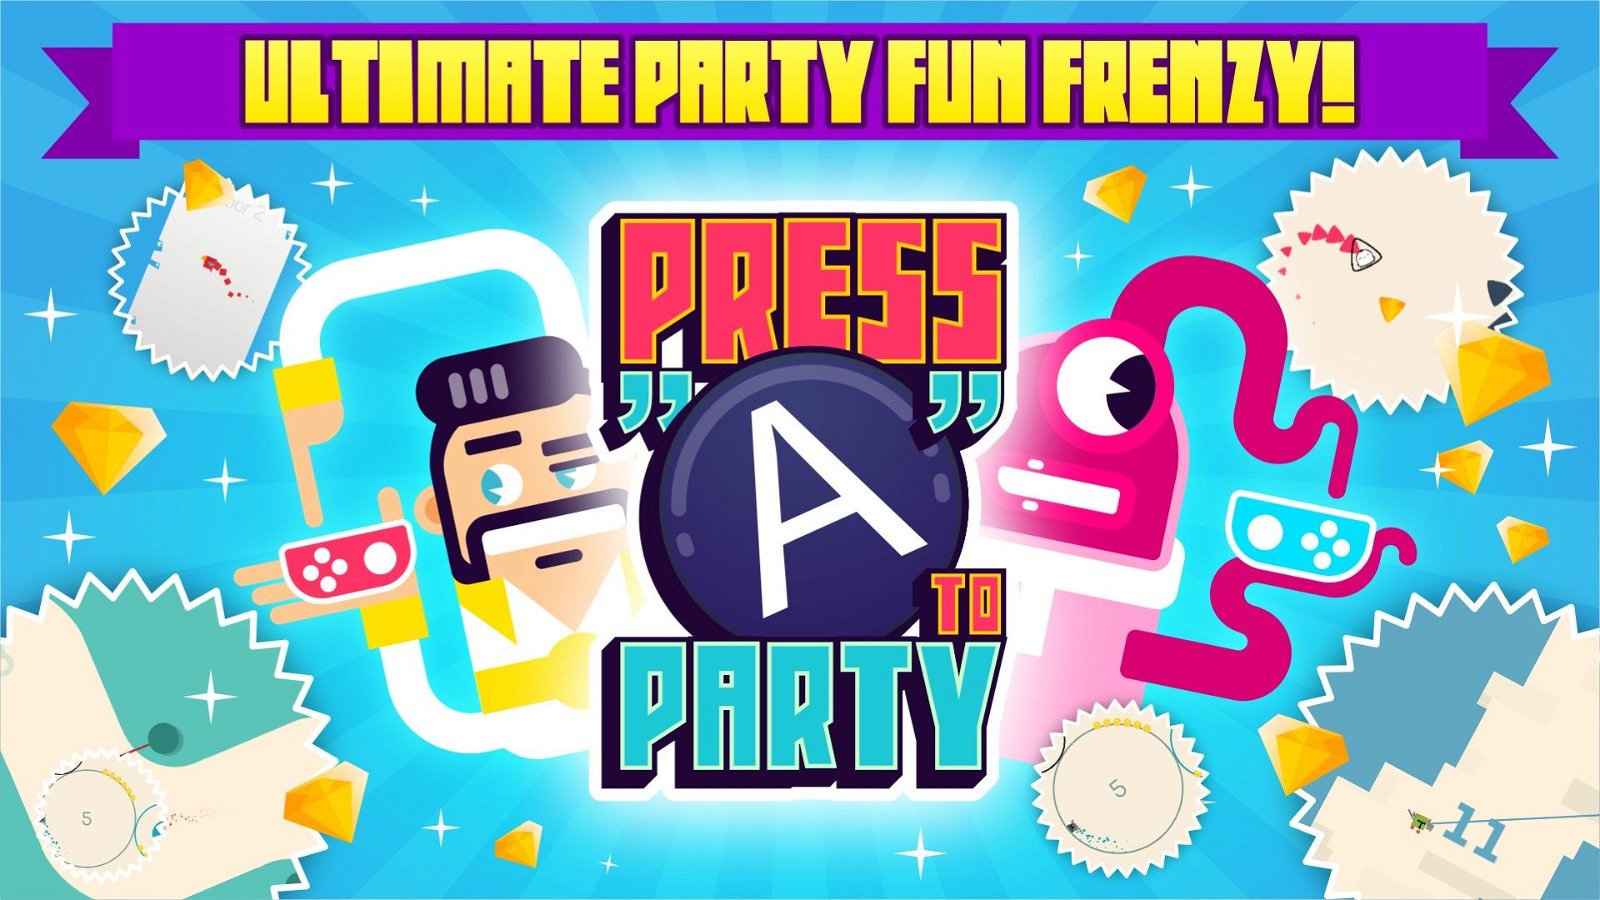 Image of Press “A” to Party